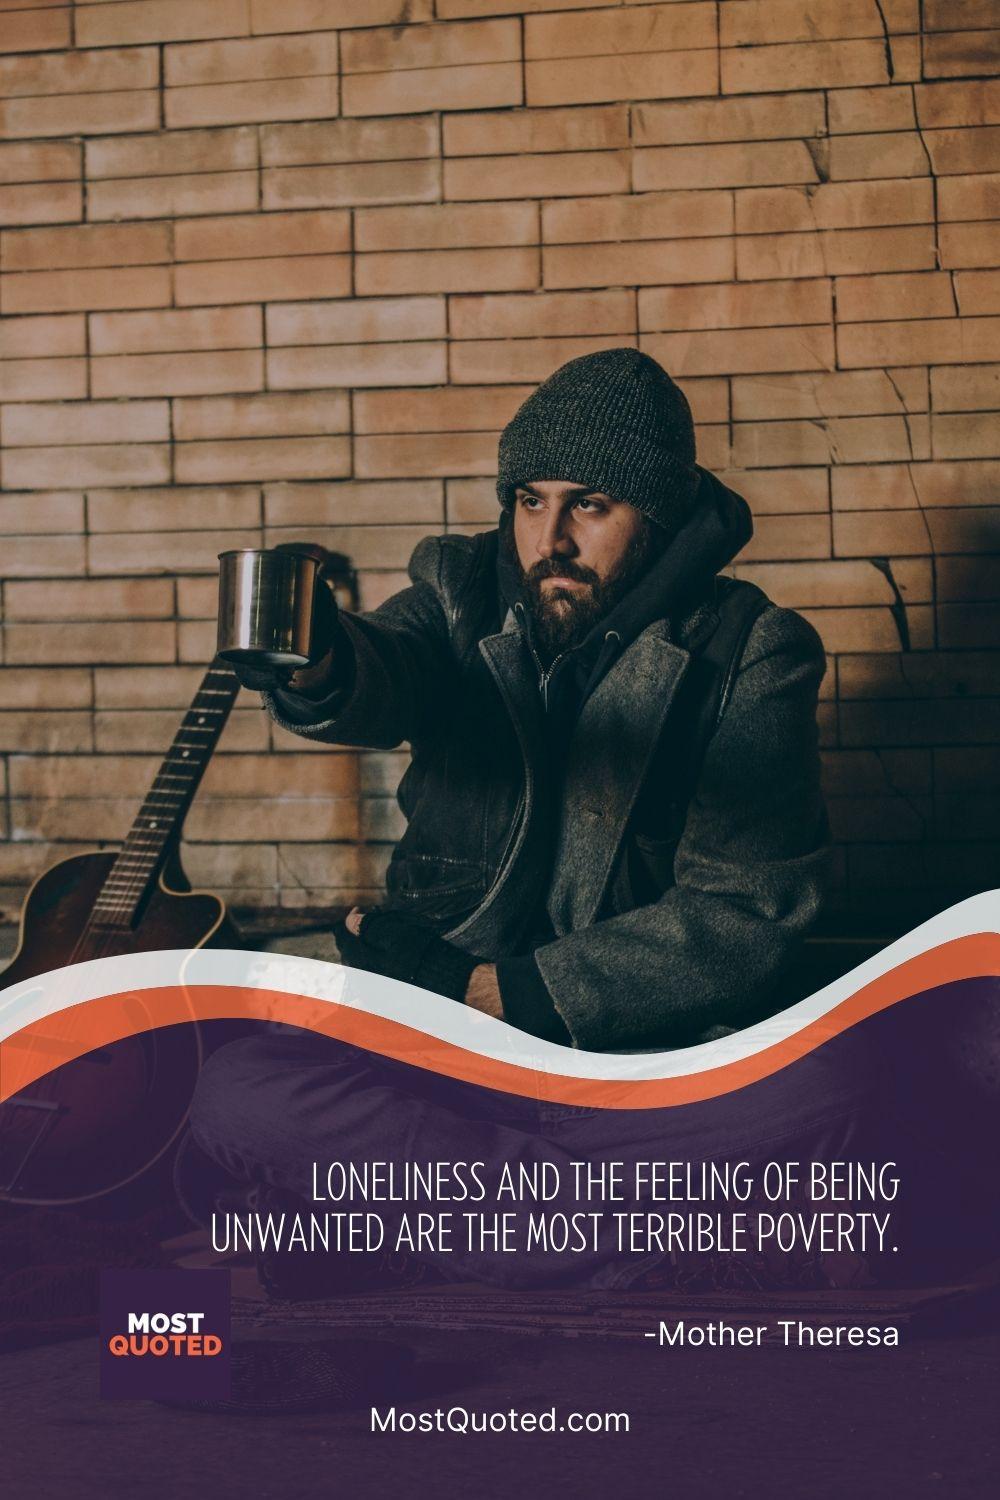 Loneliness and the feeling of being unwanted are the most terrible poverty. - Mother Teresa